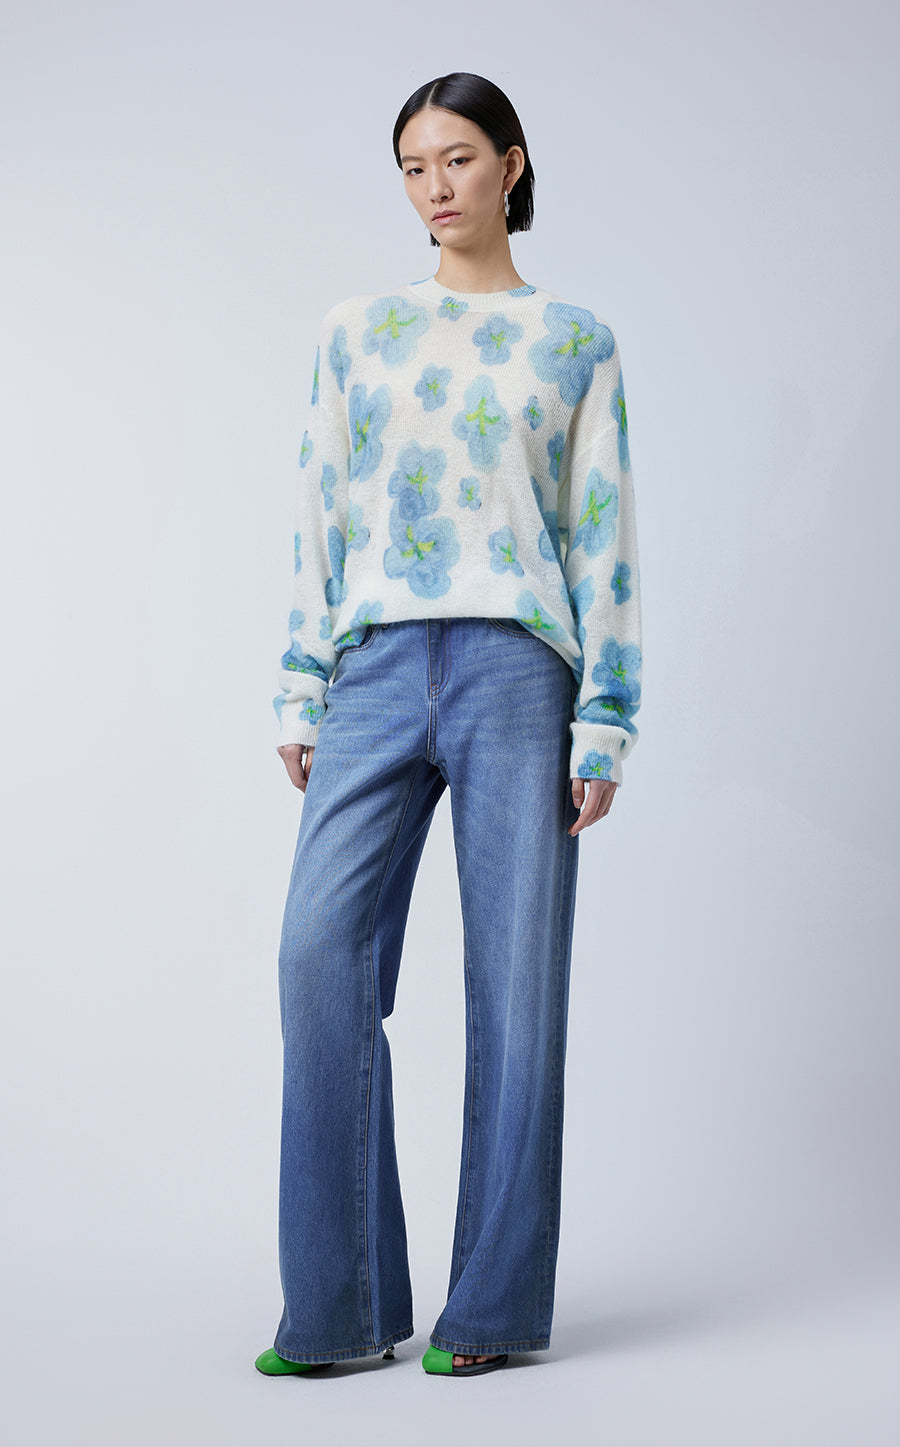 Sweater / JNBY Oversized Floral Prints Sweater